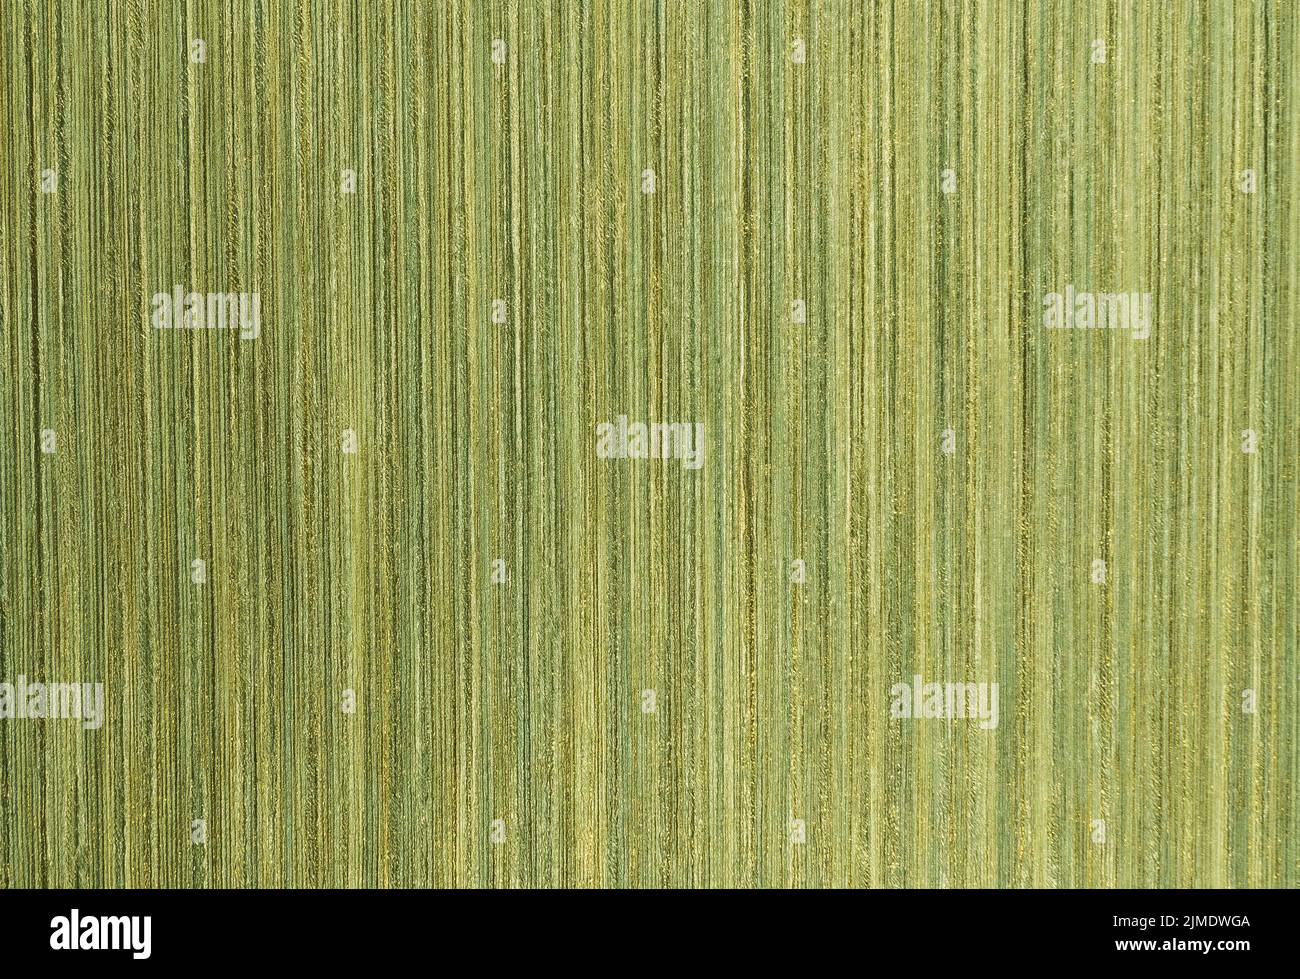 Fashionable Modern Wallpaper or Textile Surface Background with Striped Pattern Stock Photo